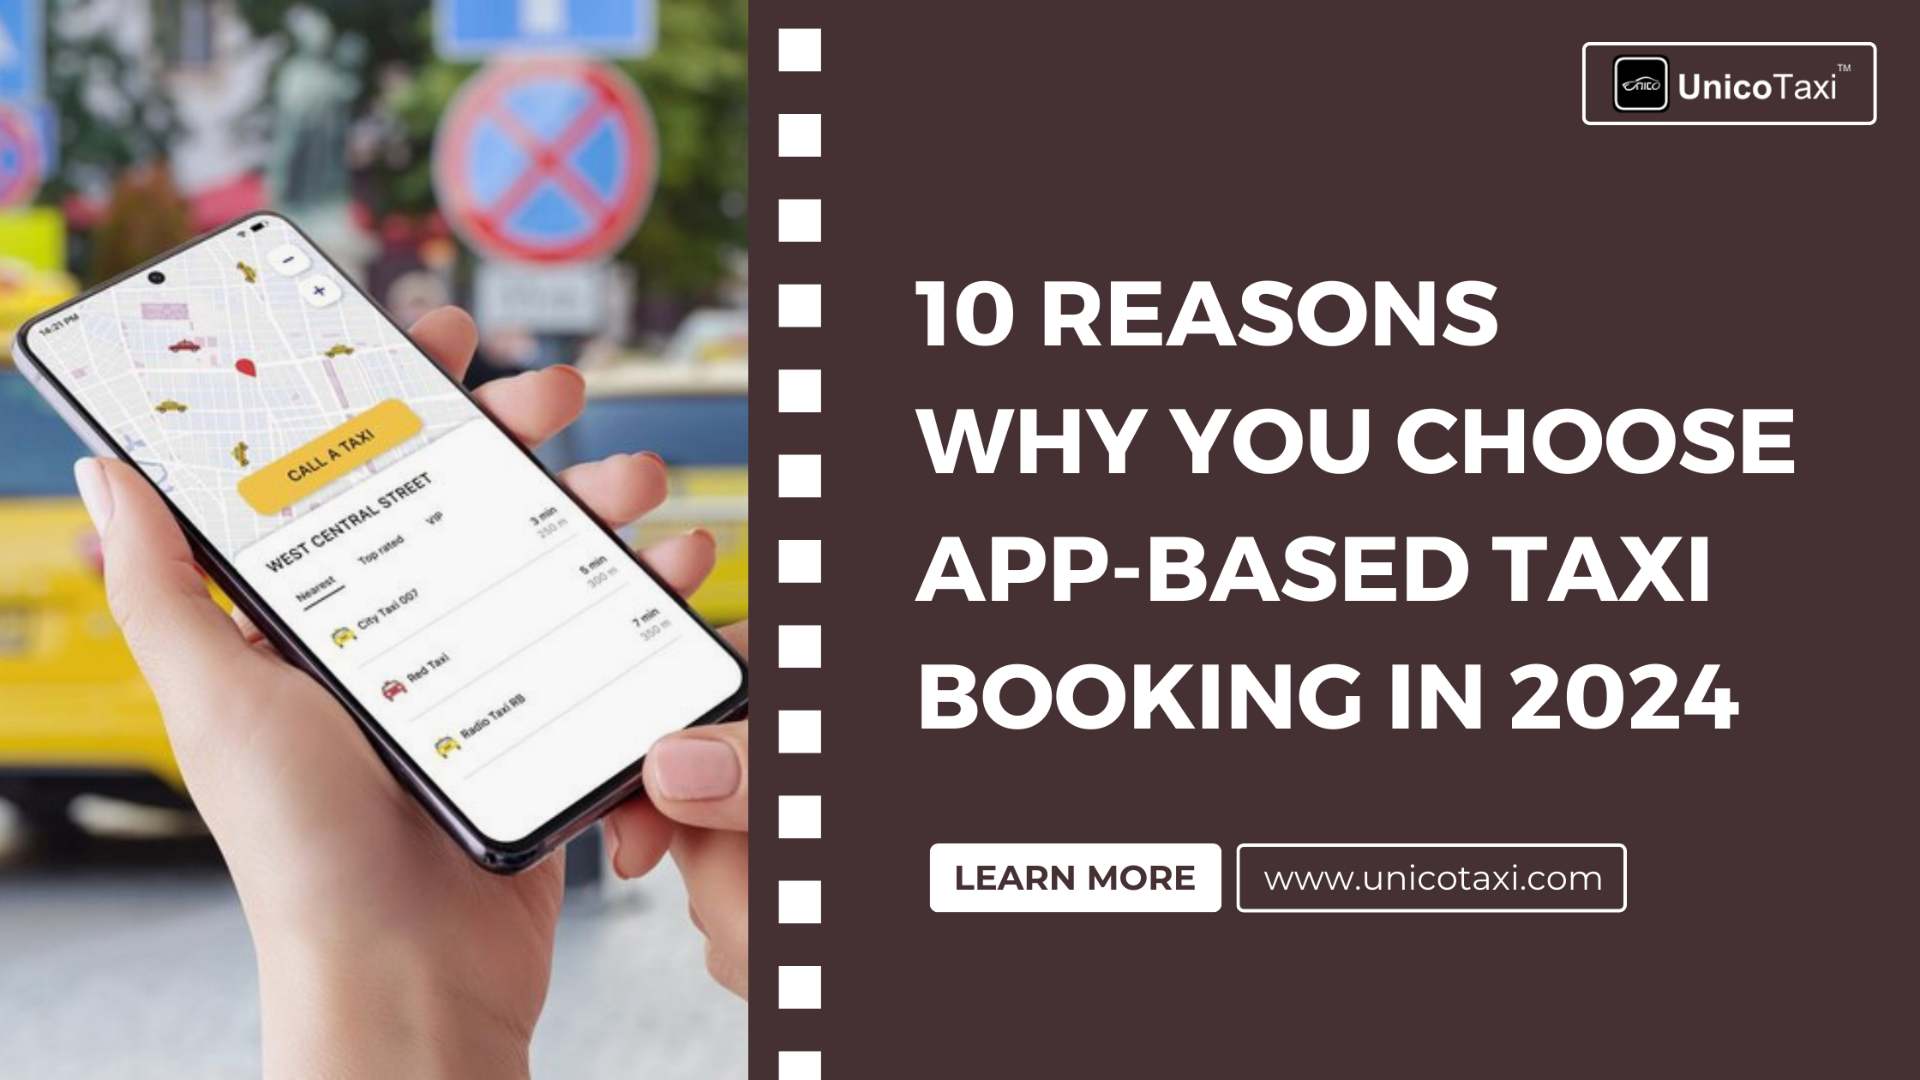 10 Reasons Why You Choose App-Based Taxi Booking in 2024